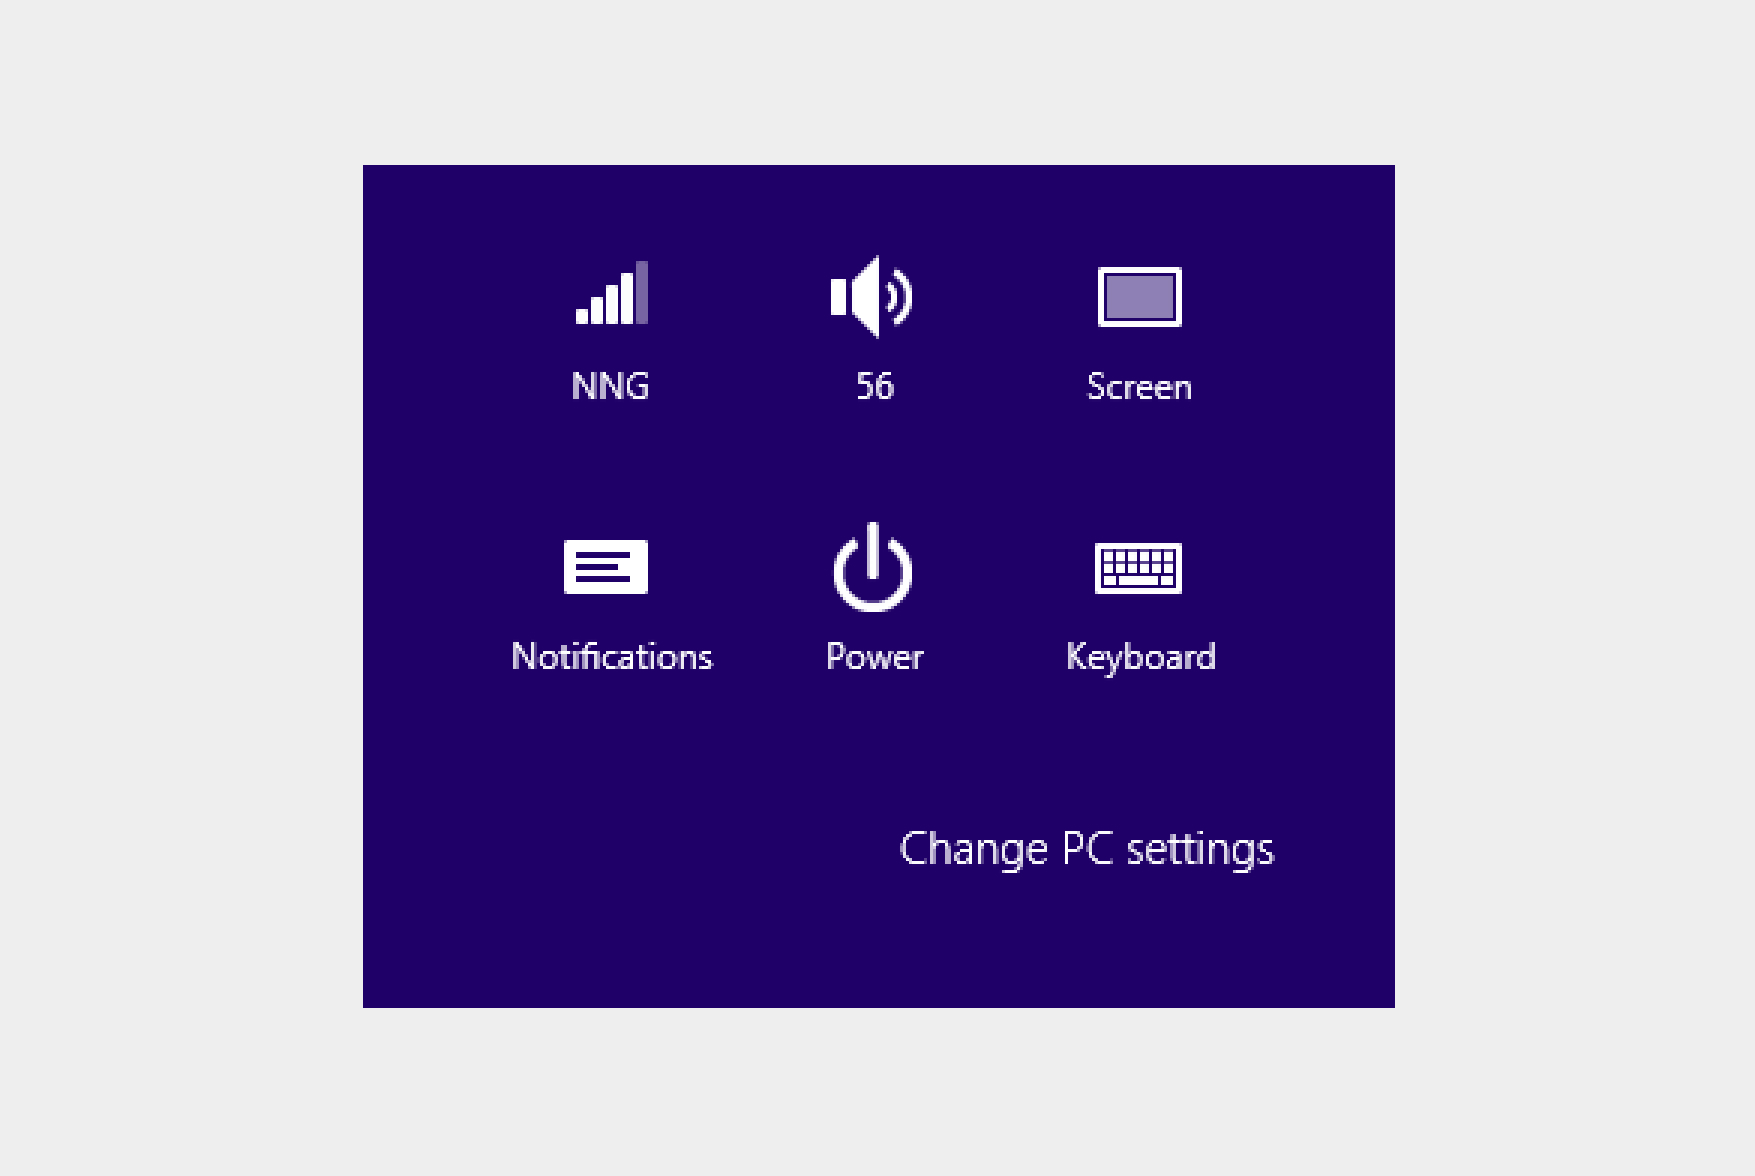 PC settings using icons and links in Windows 8